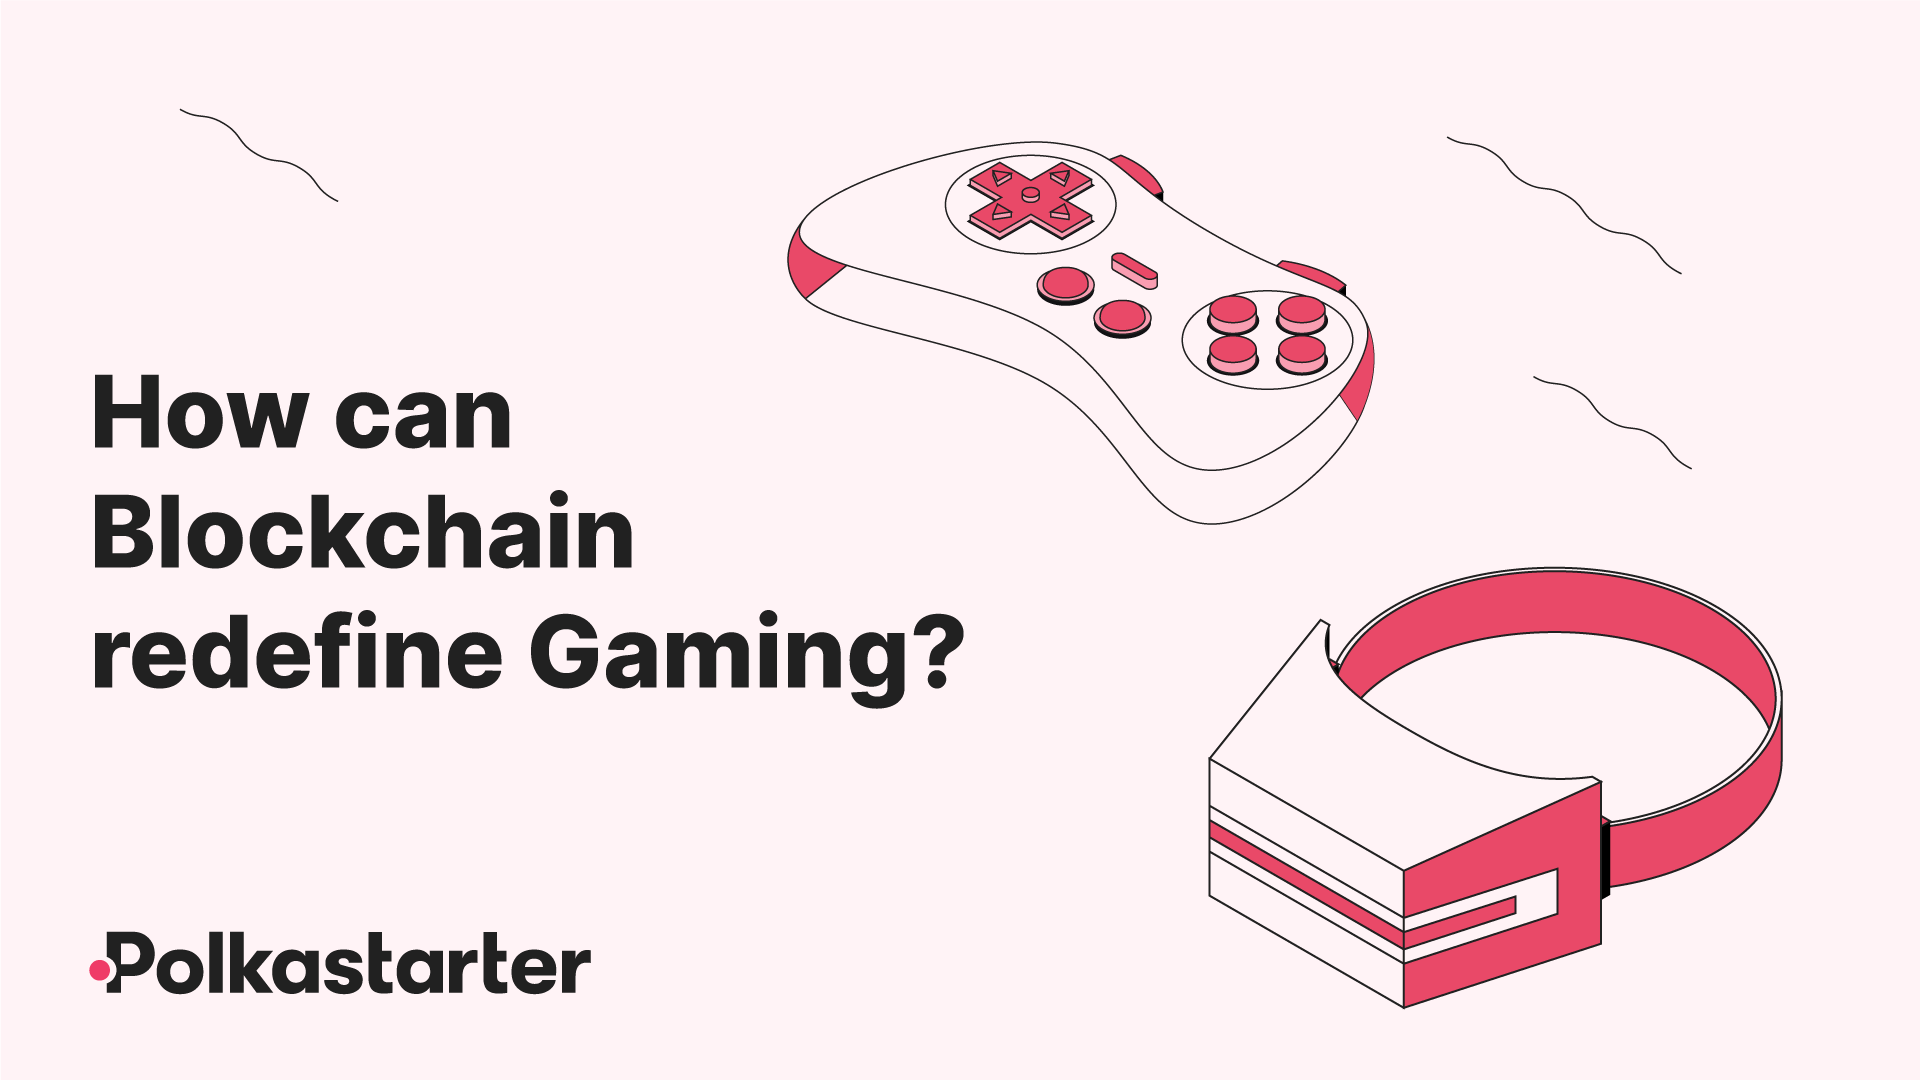 How can Blockchain redefine Gaming?